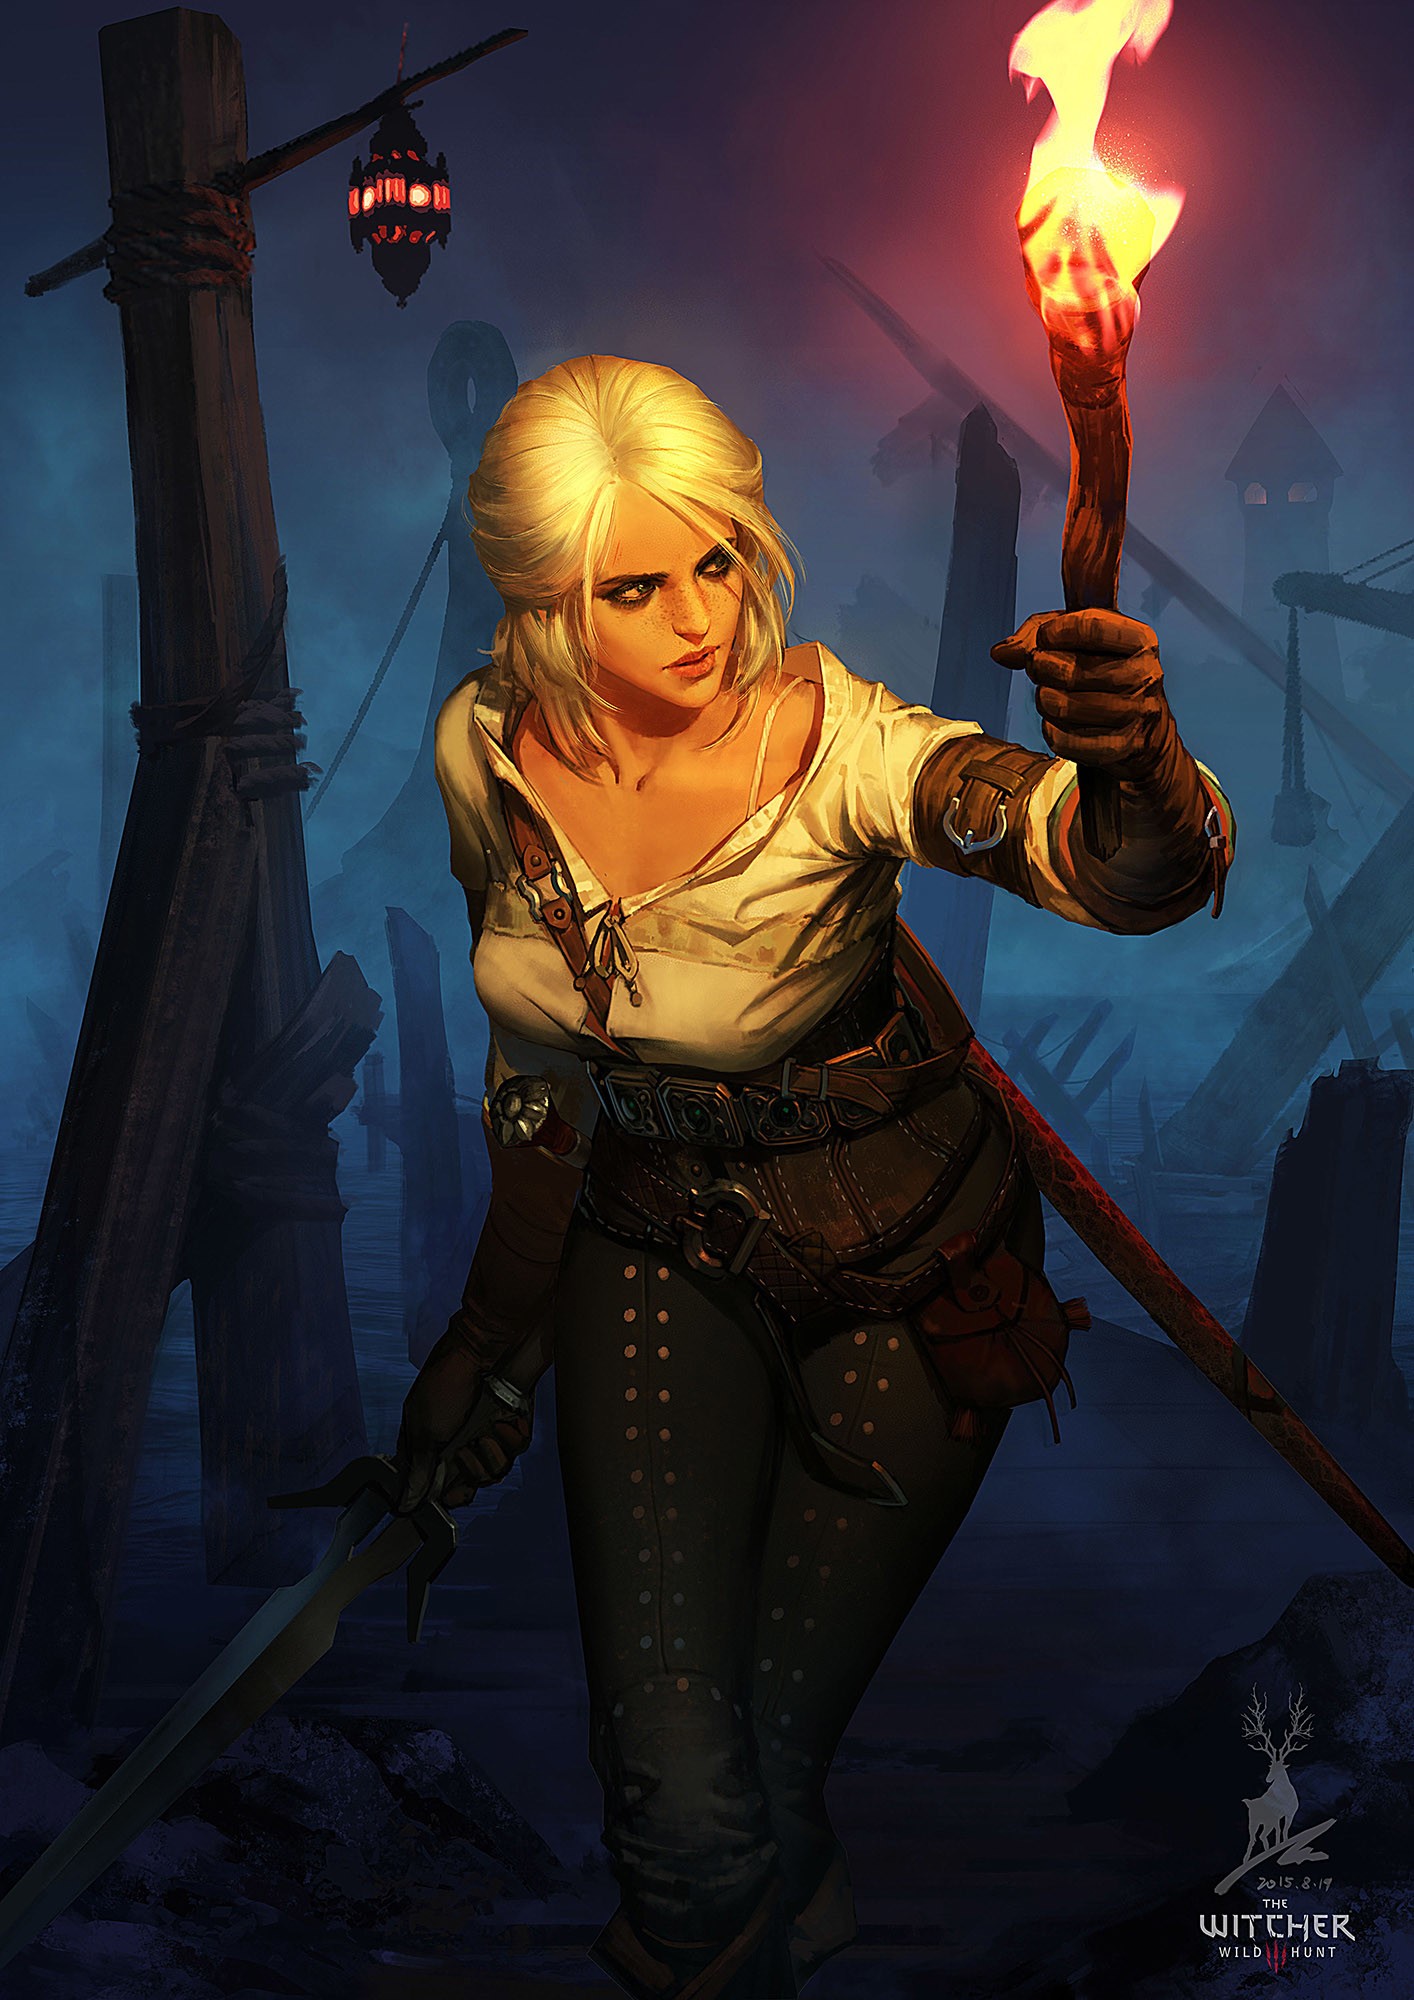 General 1414x2000 fantasy art Cirilla Fiona Elen Riannon The Witcher 3: Wild Hunt The Witcher fantasy girl video games digital art artwork women portrait display white hair torches video game girls video game characters